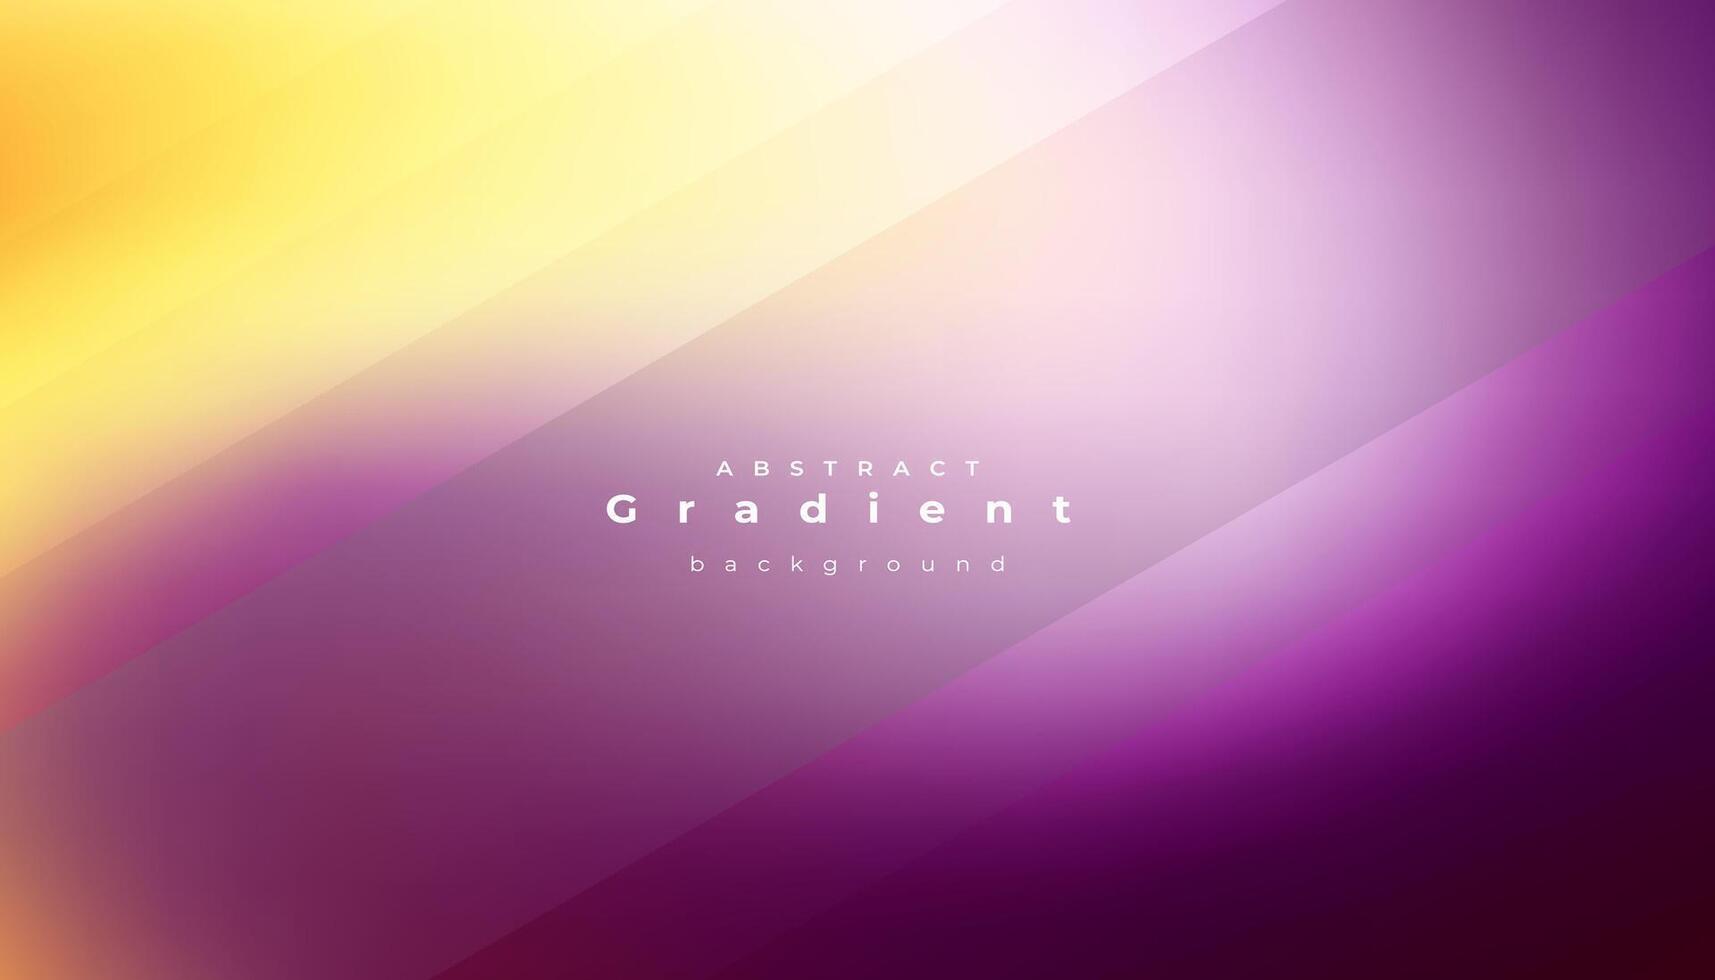 Abstract Gradient Template vector